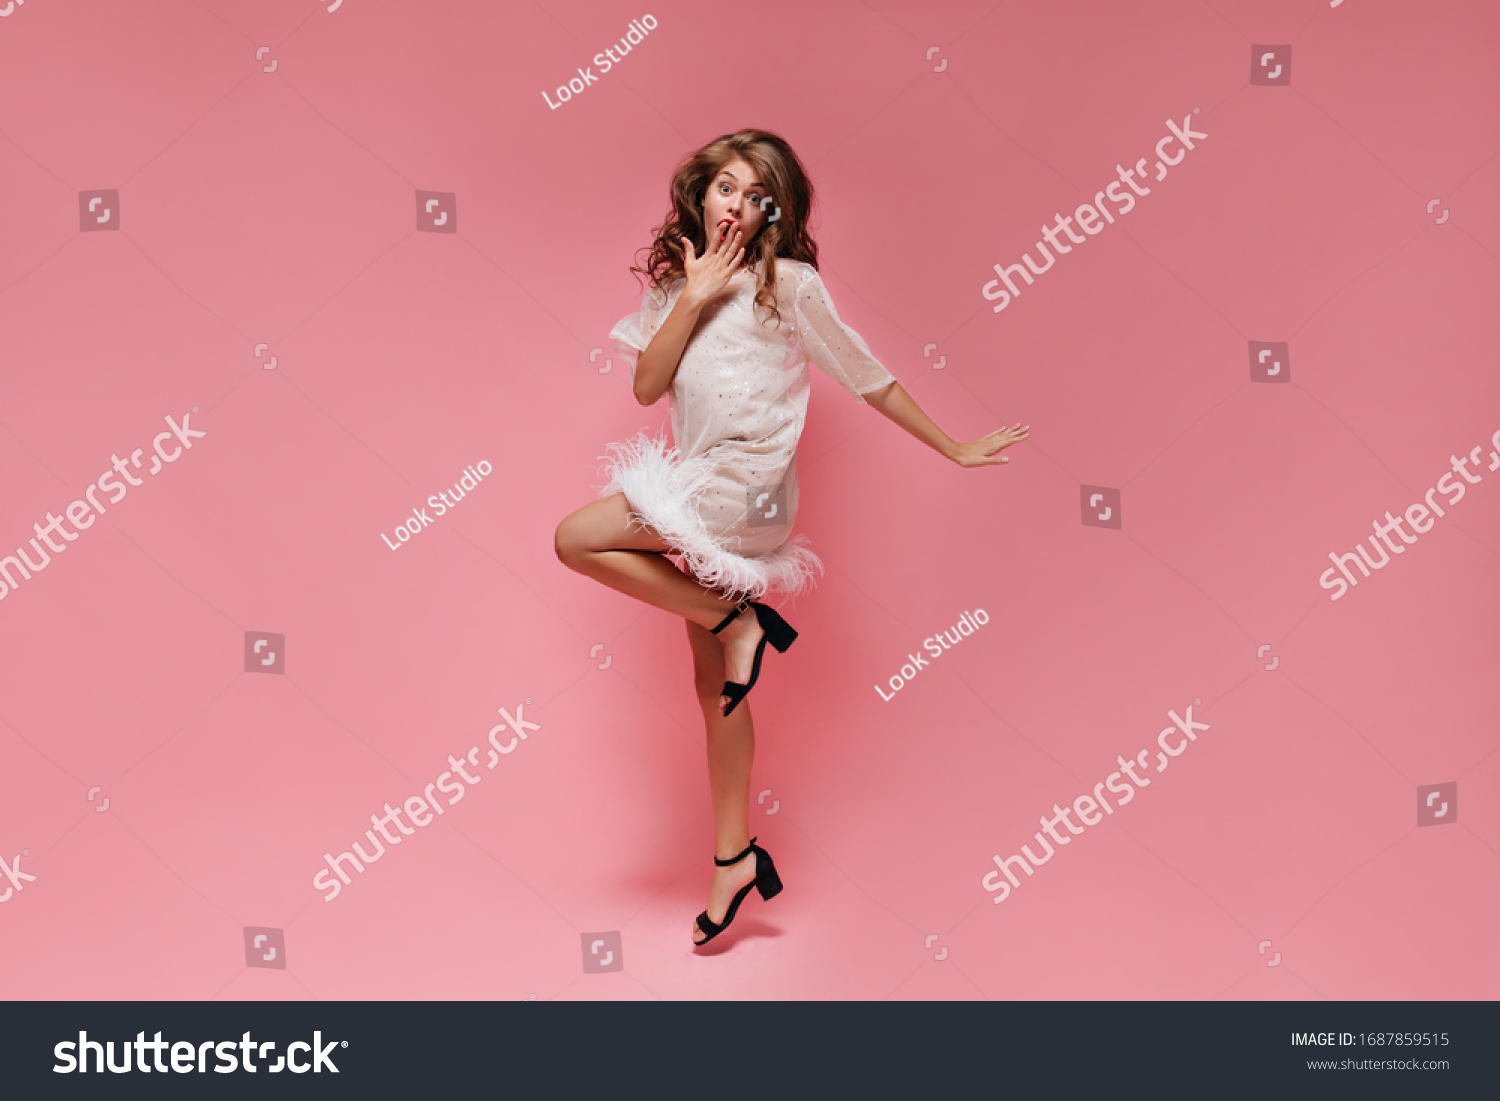 Surprised woman in white dress jumps on pink background. Happy shocked girl covers mouth and moves on isolated. #1687859515